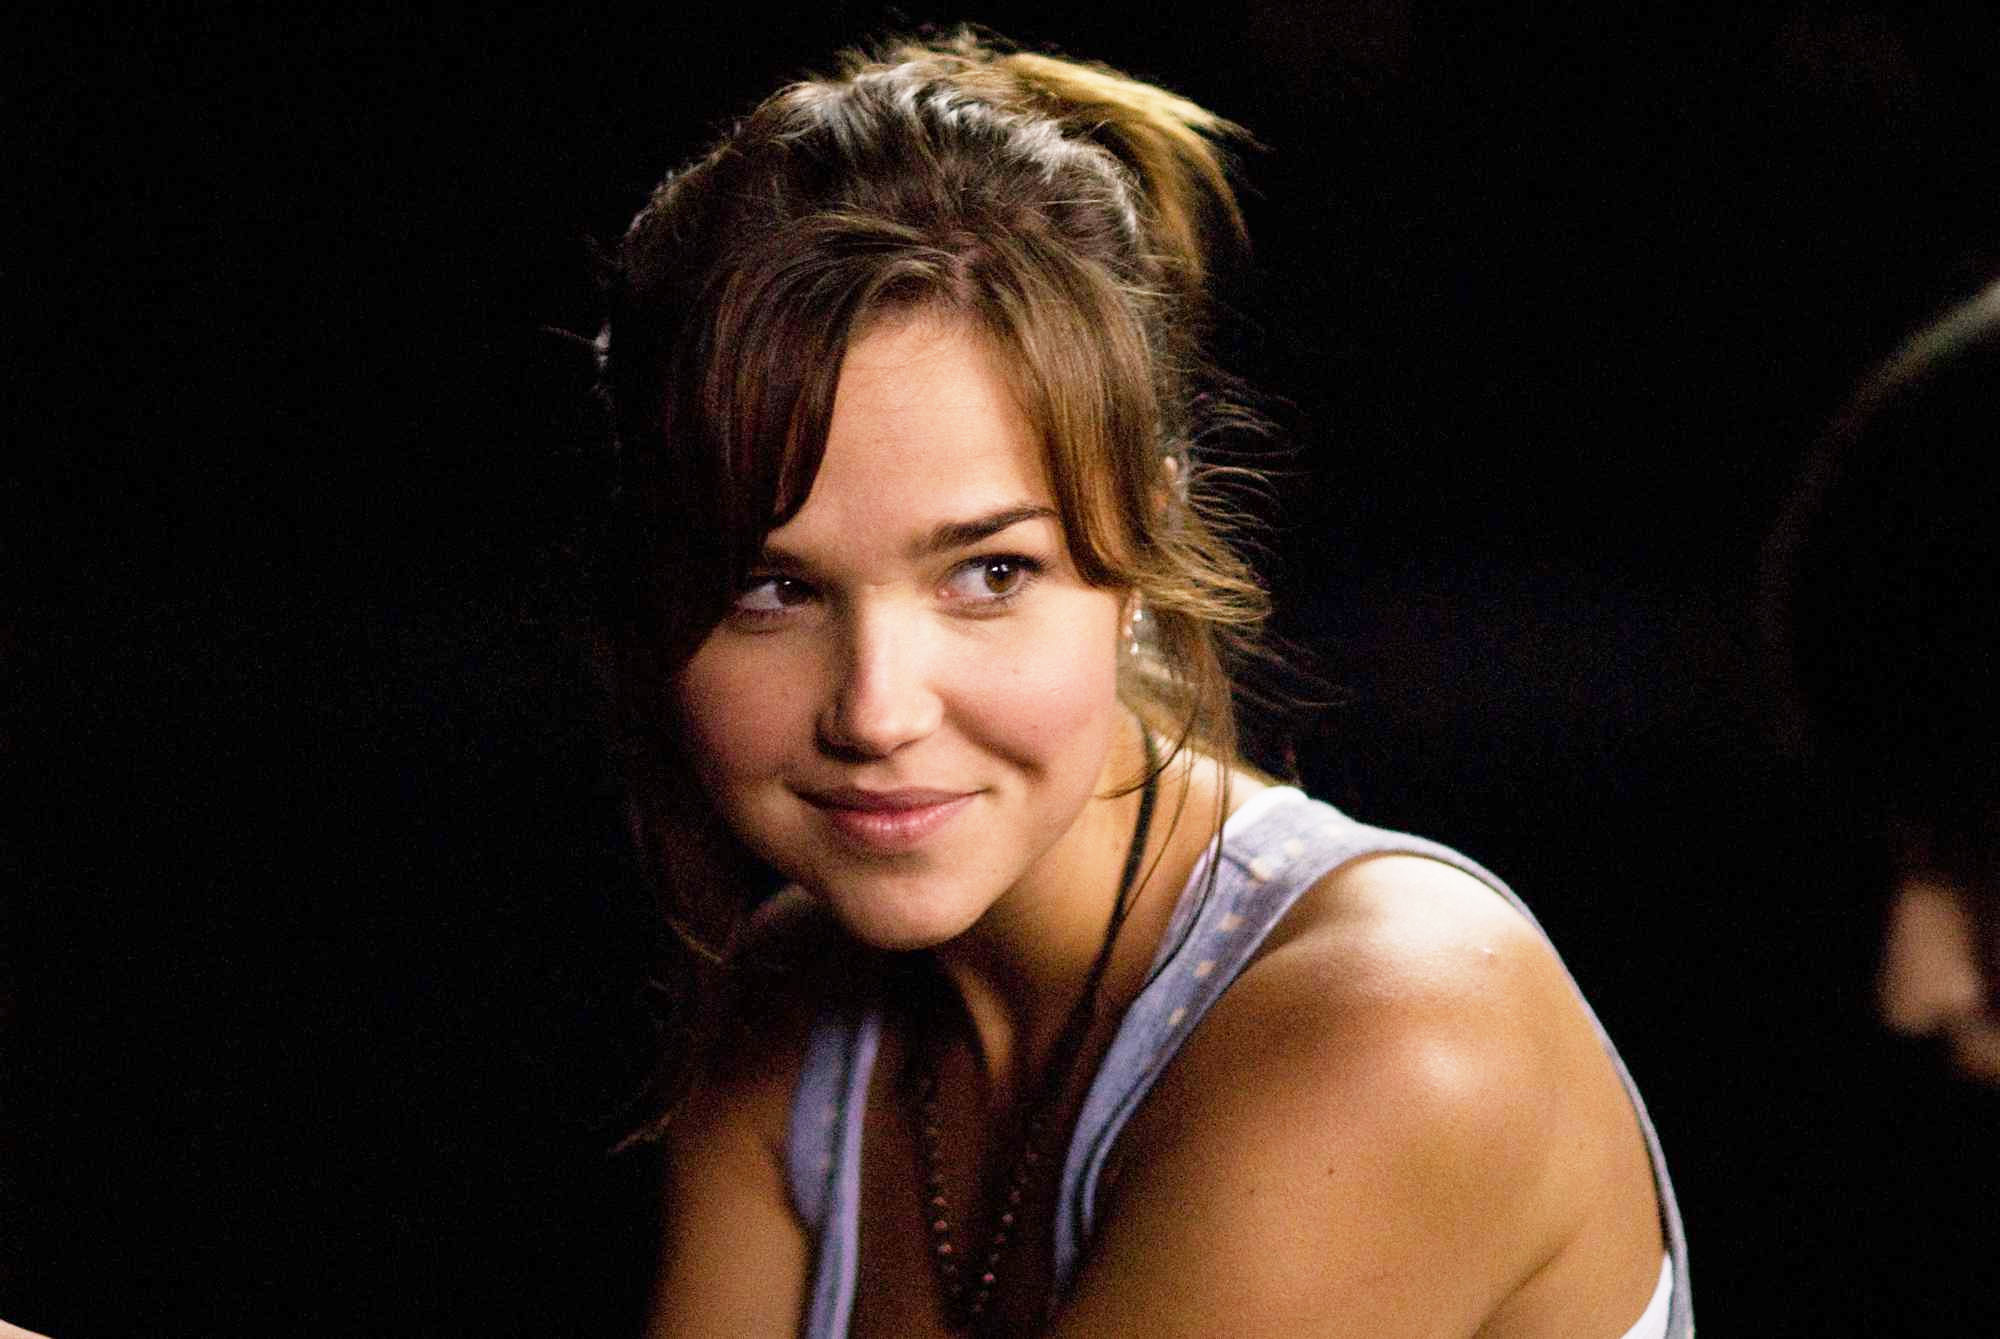 Arielle Kebbel stars as Alex in DreamWorks' The Uninvited (2009). Photo credit by Kimberley French.